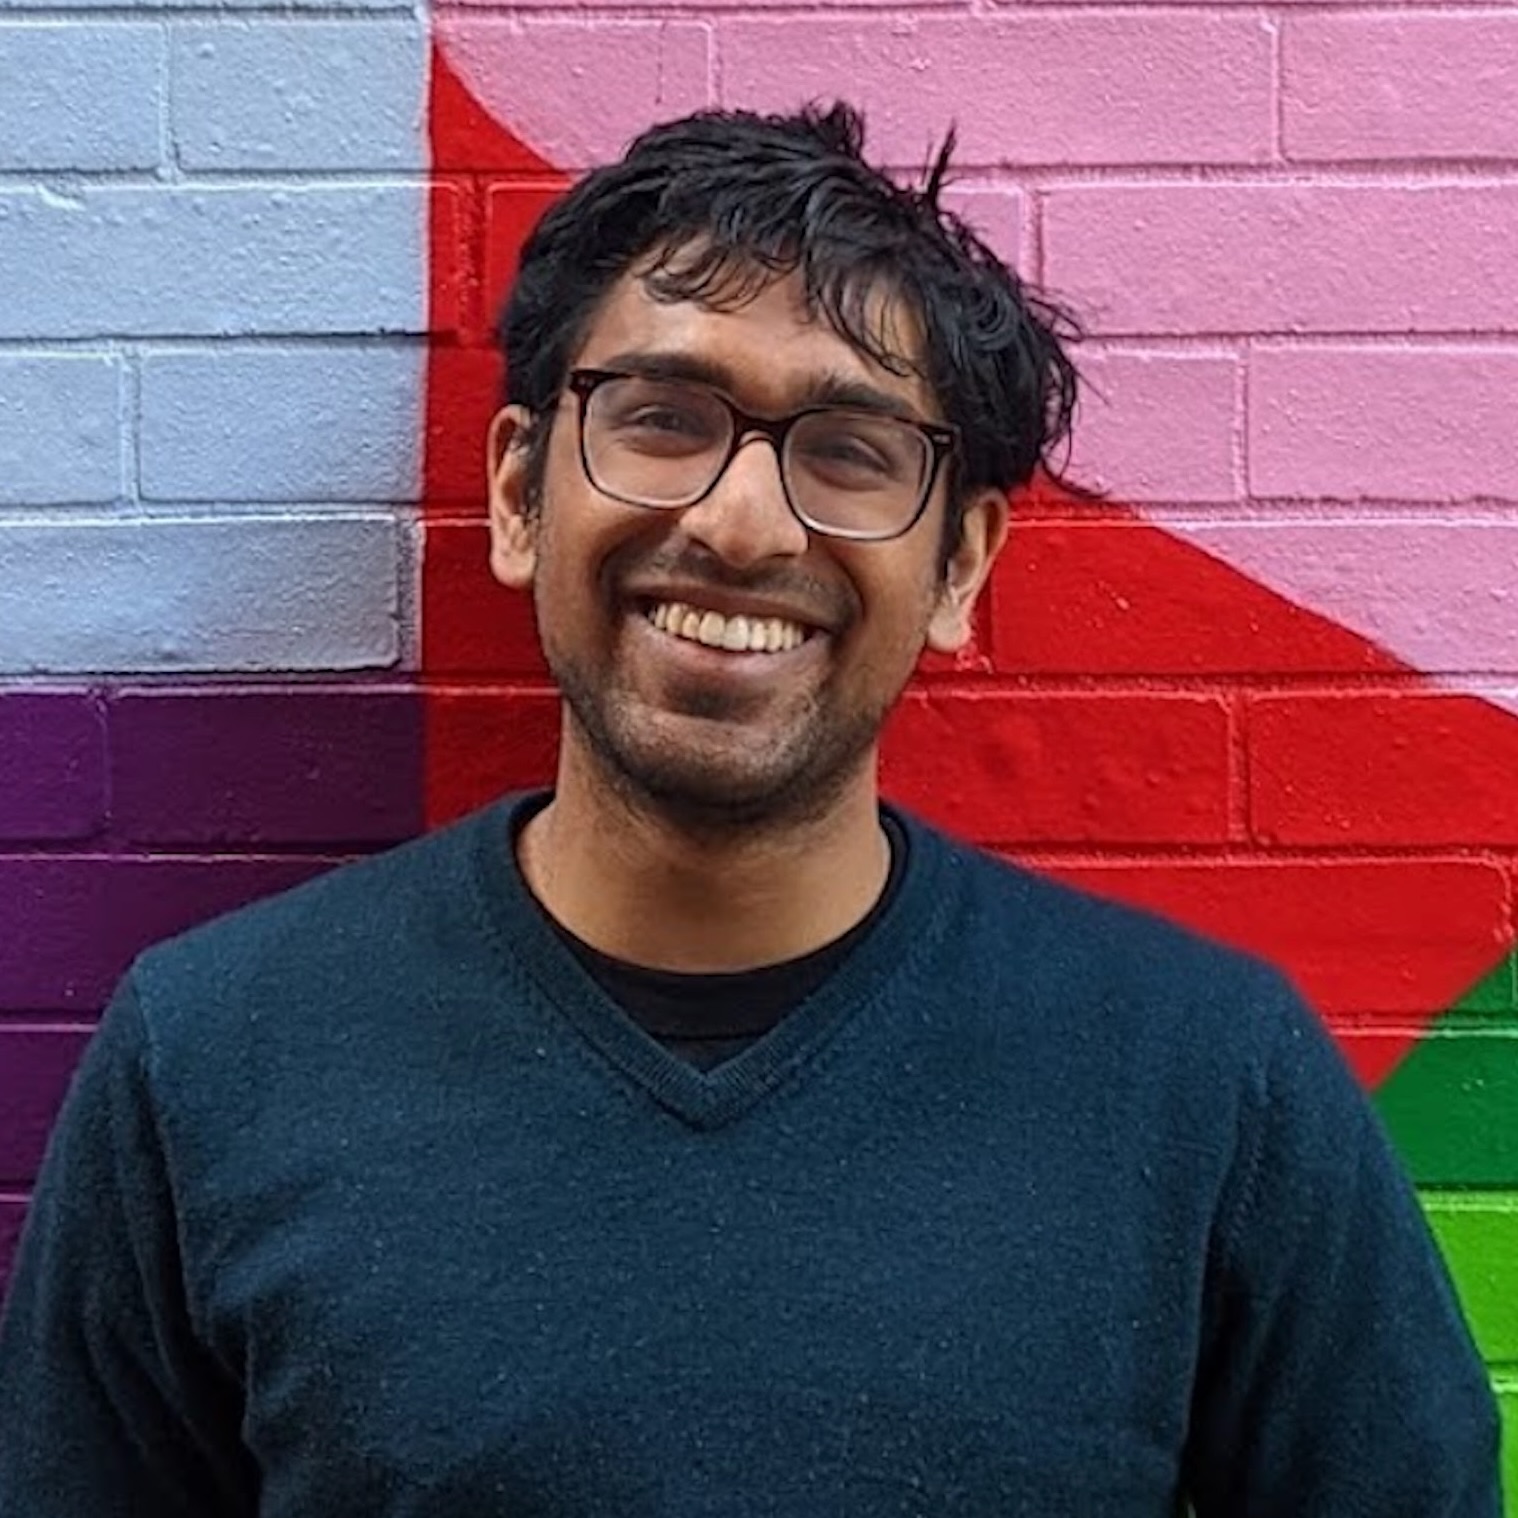 Sathvik Nair, PhD student in Linguistics, standing in front of a brick wall painted colorfully with geometric shapes, smiling broadly.